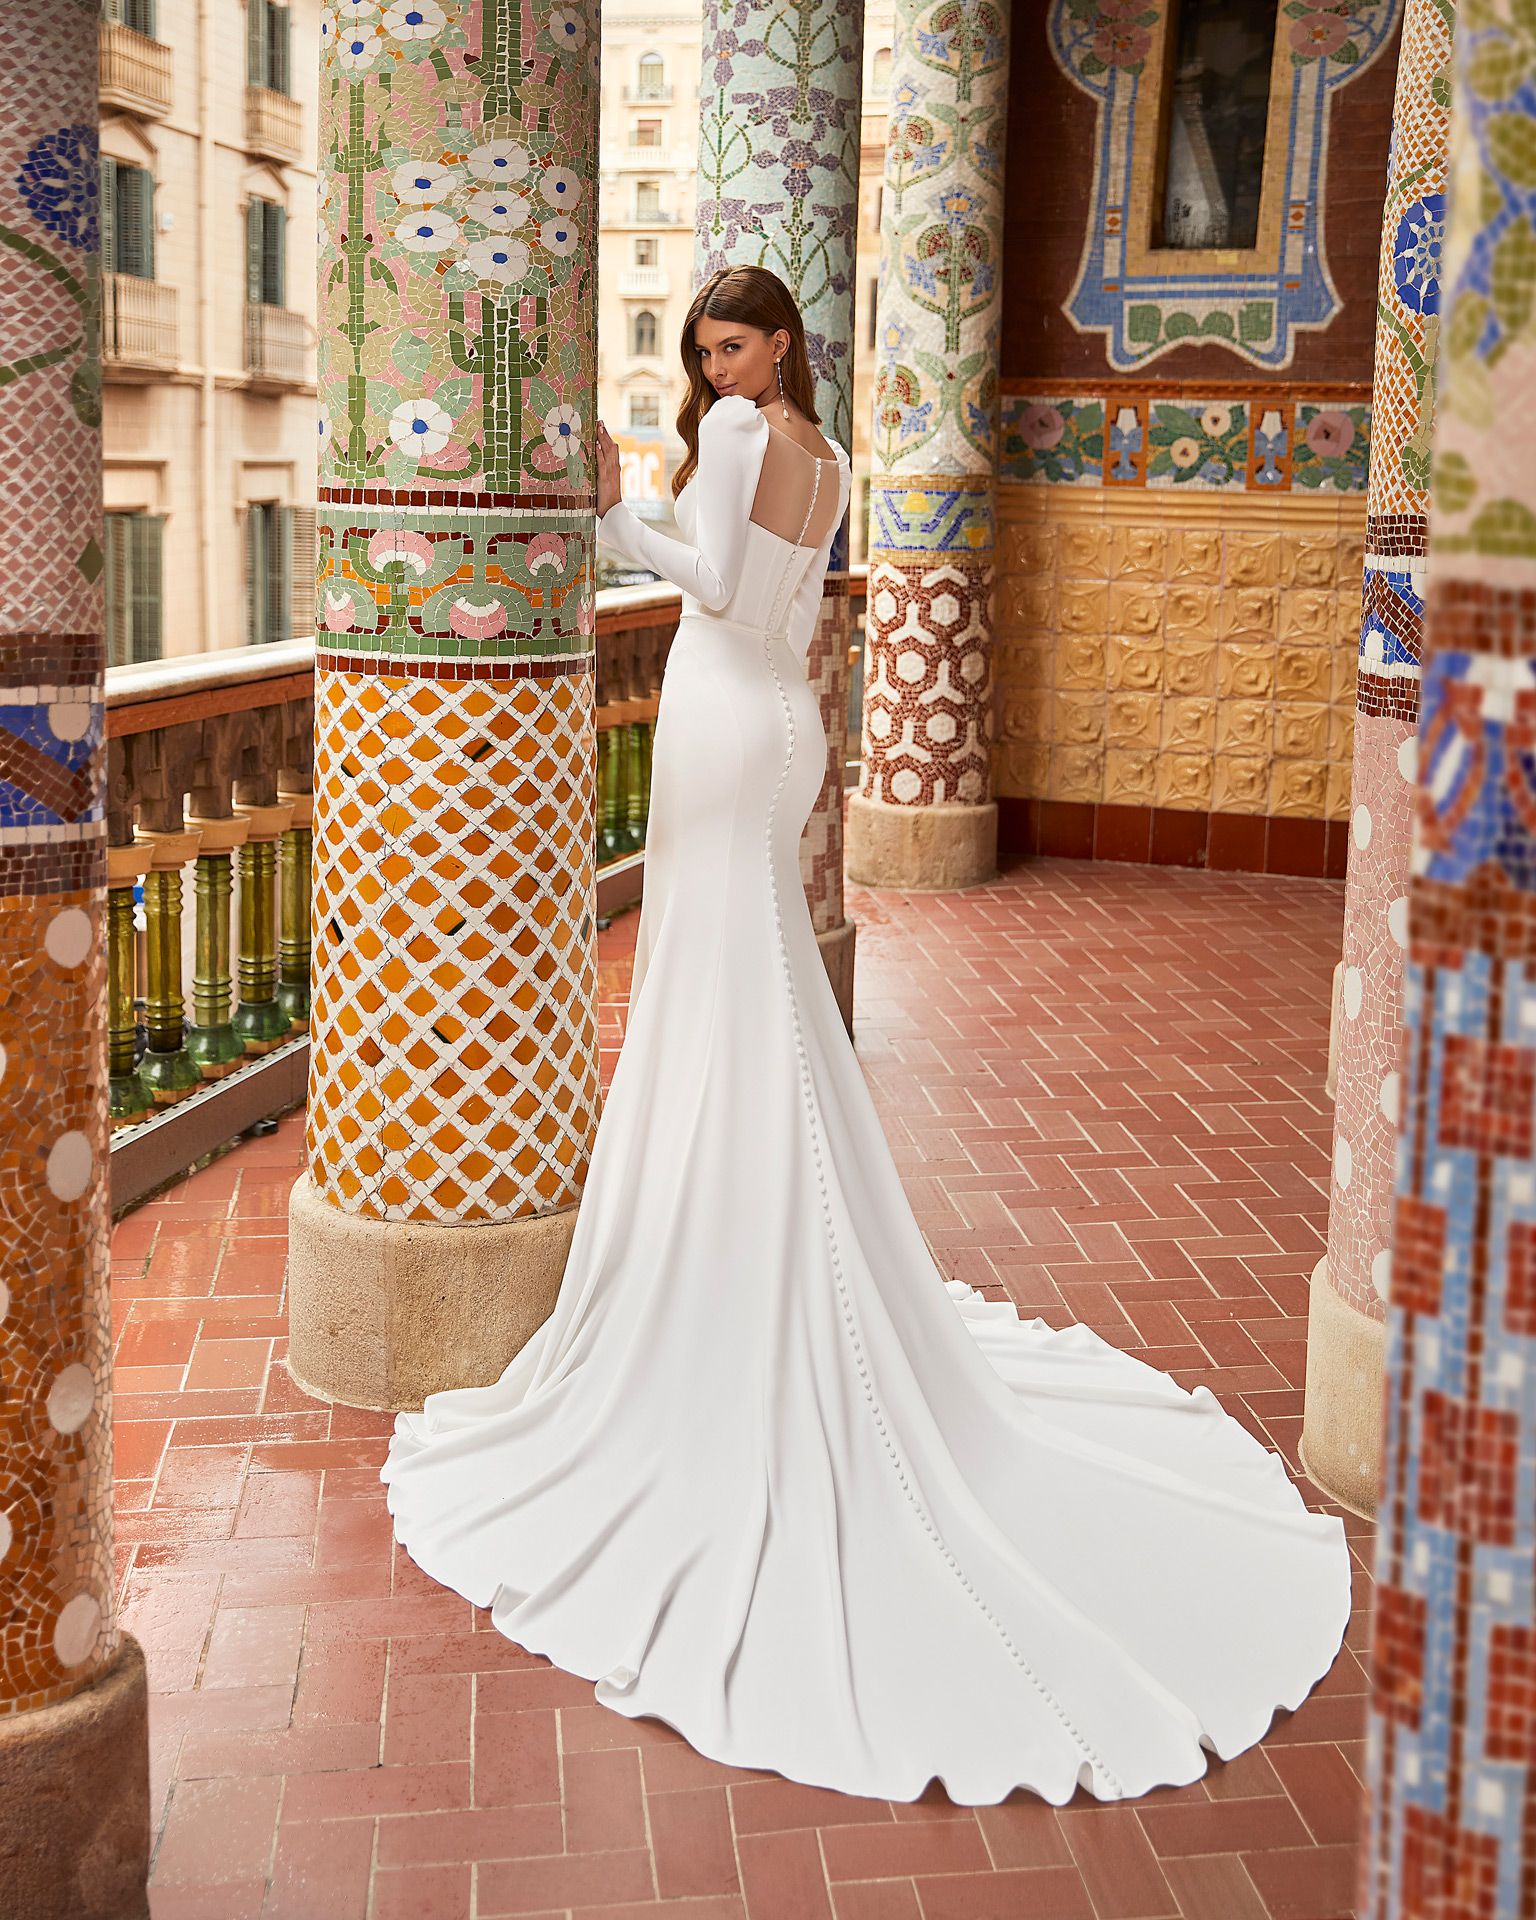 Modern sheath-style wedding dress, made of stretch crepe, featuring special sleeves; with a deep-plunge neckline, a button-up sheer back, and long sleeves. Trendy Luna Novias design entirely made of stretch crepe. LUNA_NOVIAS.